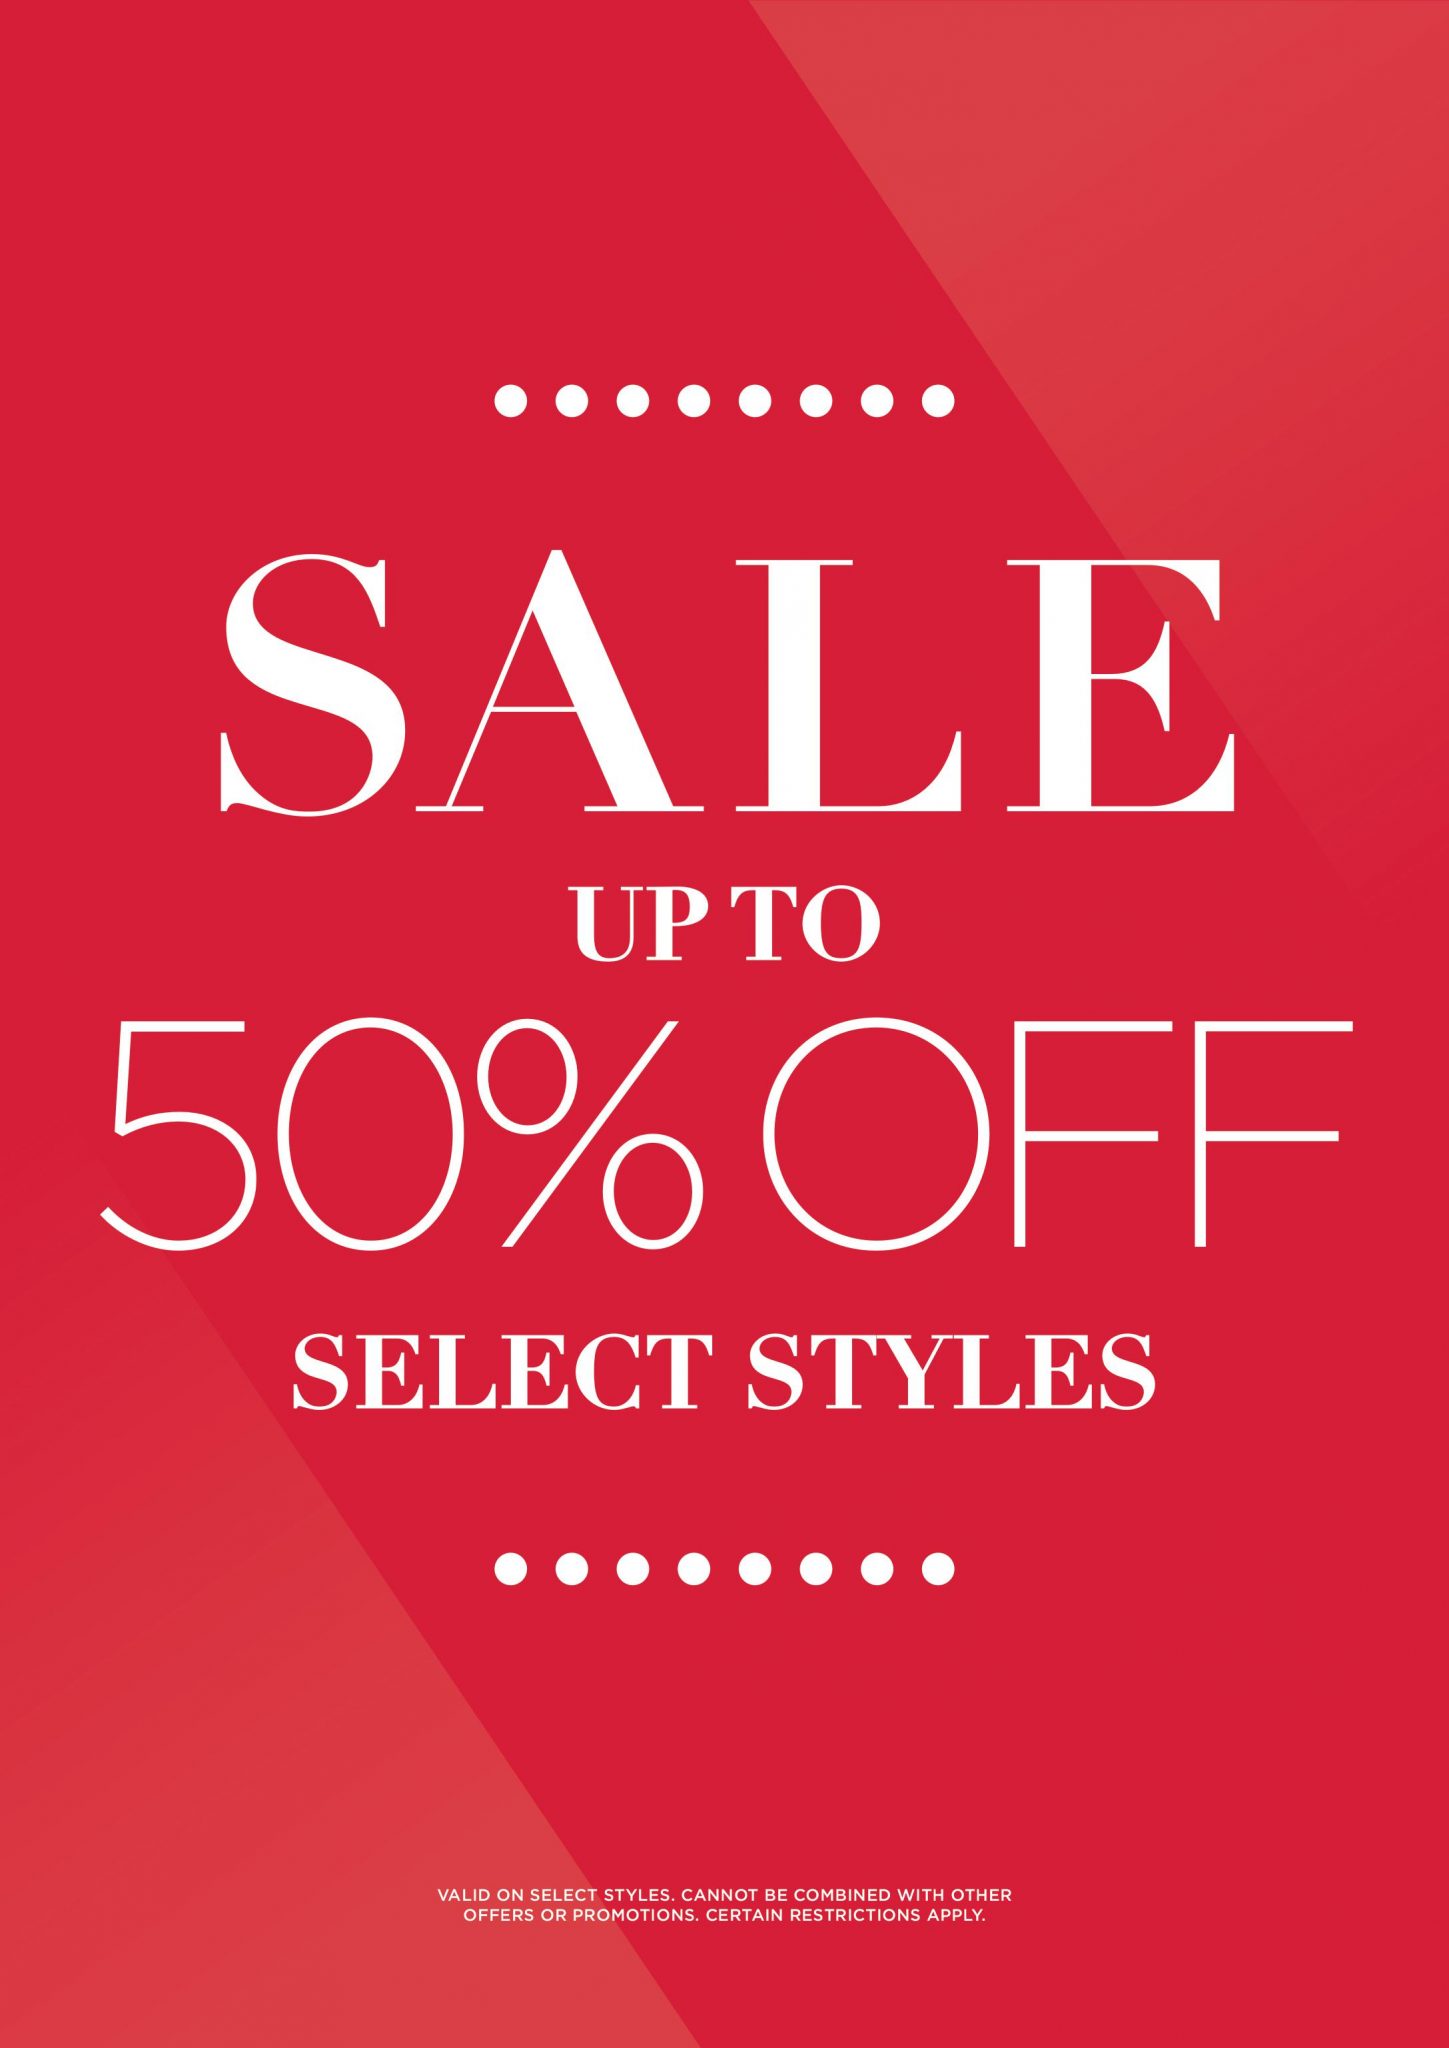 Skechers Up to 50% | Mahon Point Shopping Centre